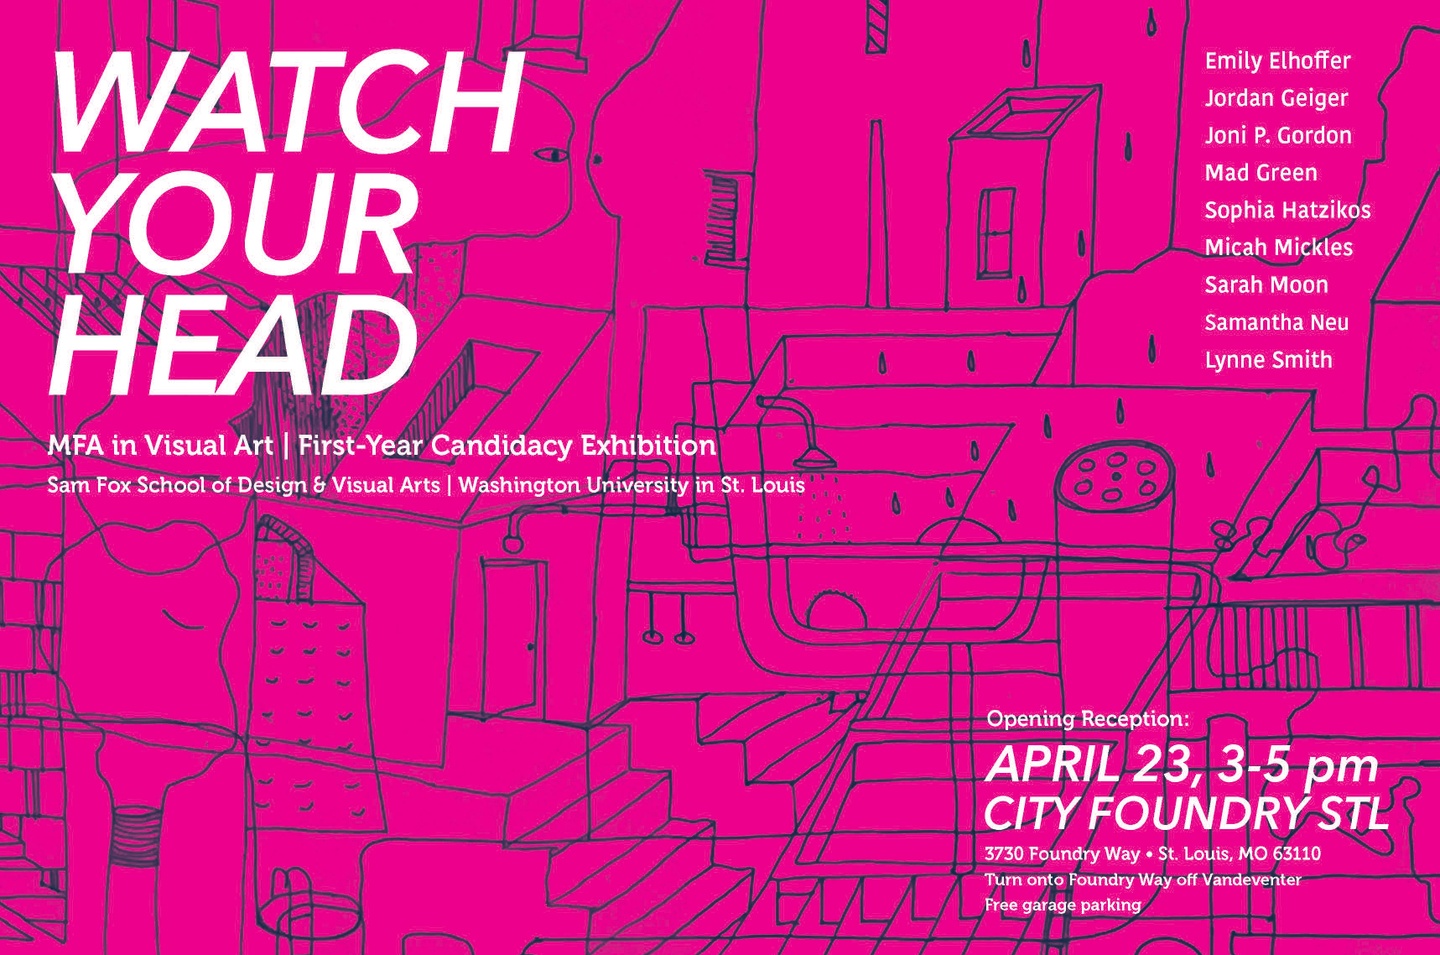 'Watch Your Head' event poster in bright fuchsia pink with white title text, location details and featured artists names. The background is a rough sketch of a neighborhood block